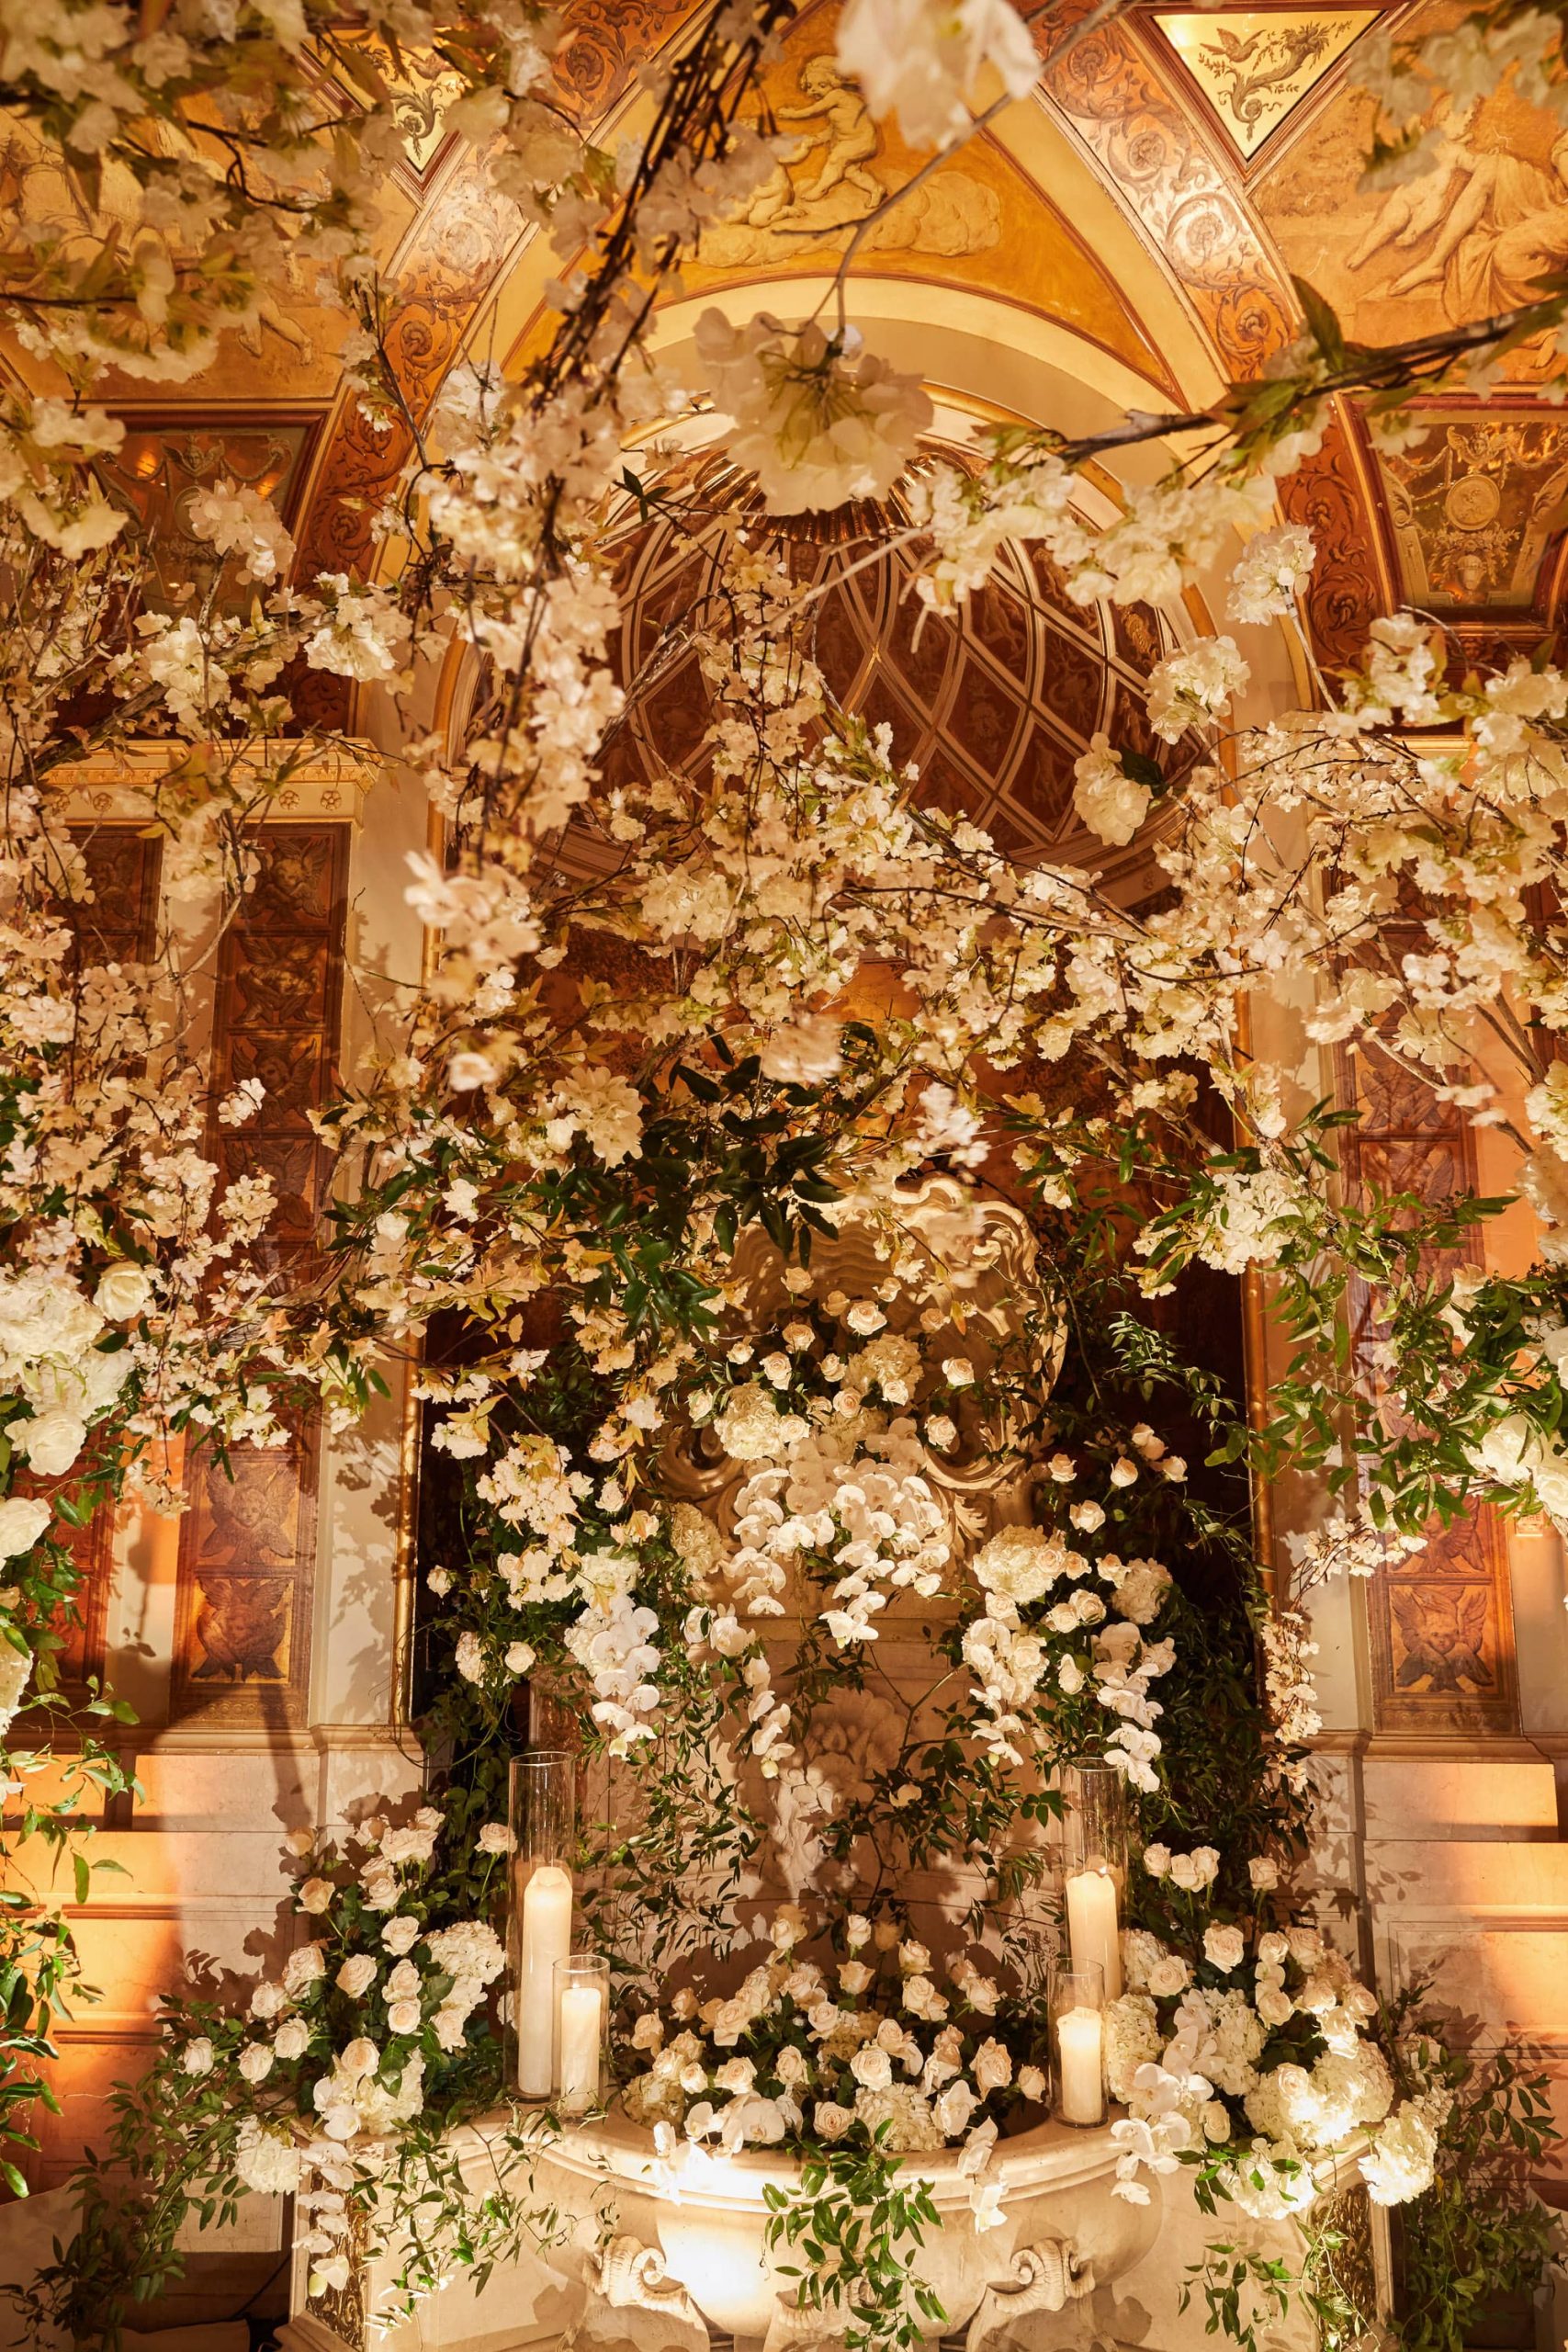 Exquisite floral arrangements designed by Ed Libby at this classic autumn wedding at The Plaza in NYC | Photo by Christian Oth Studio